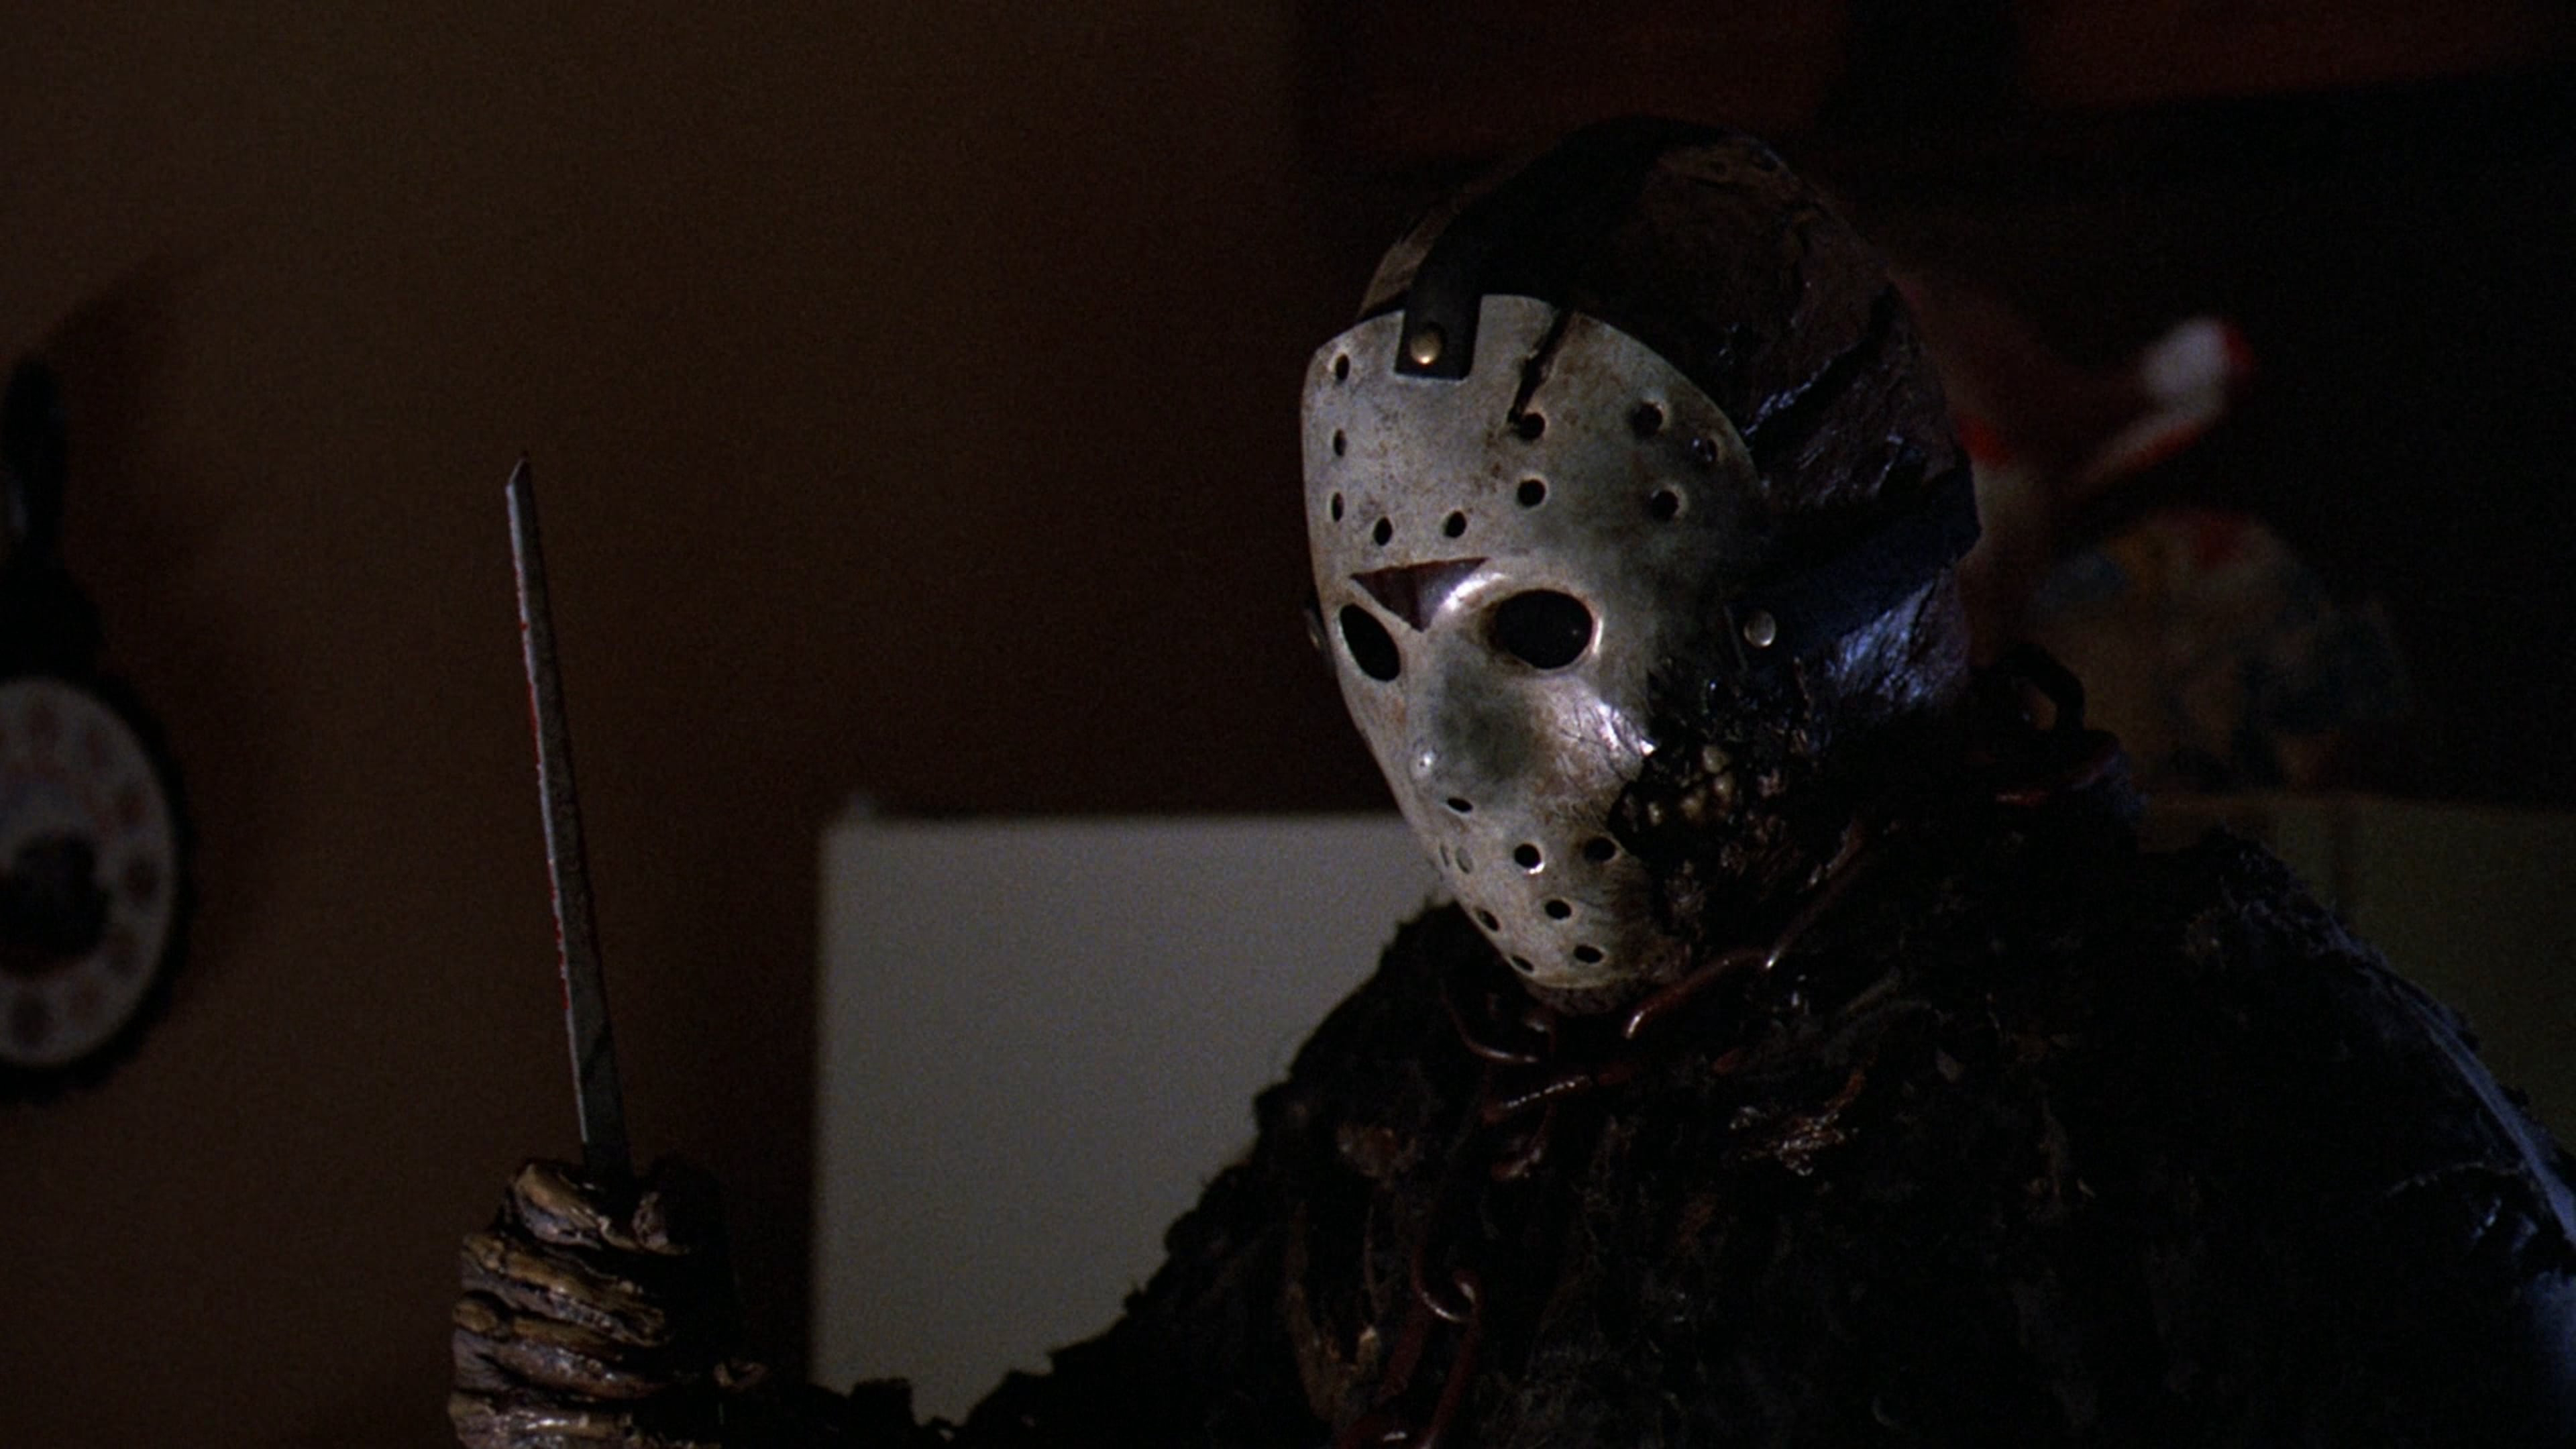 Friday the 13th Part VII: The New Blood / Friday the 13th Part VII: The New Blood (1988)